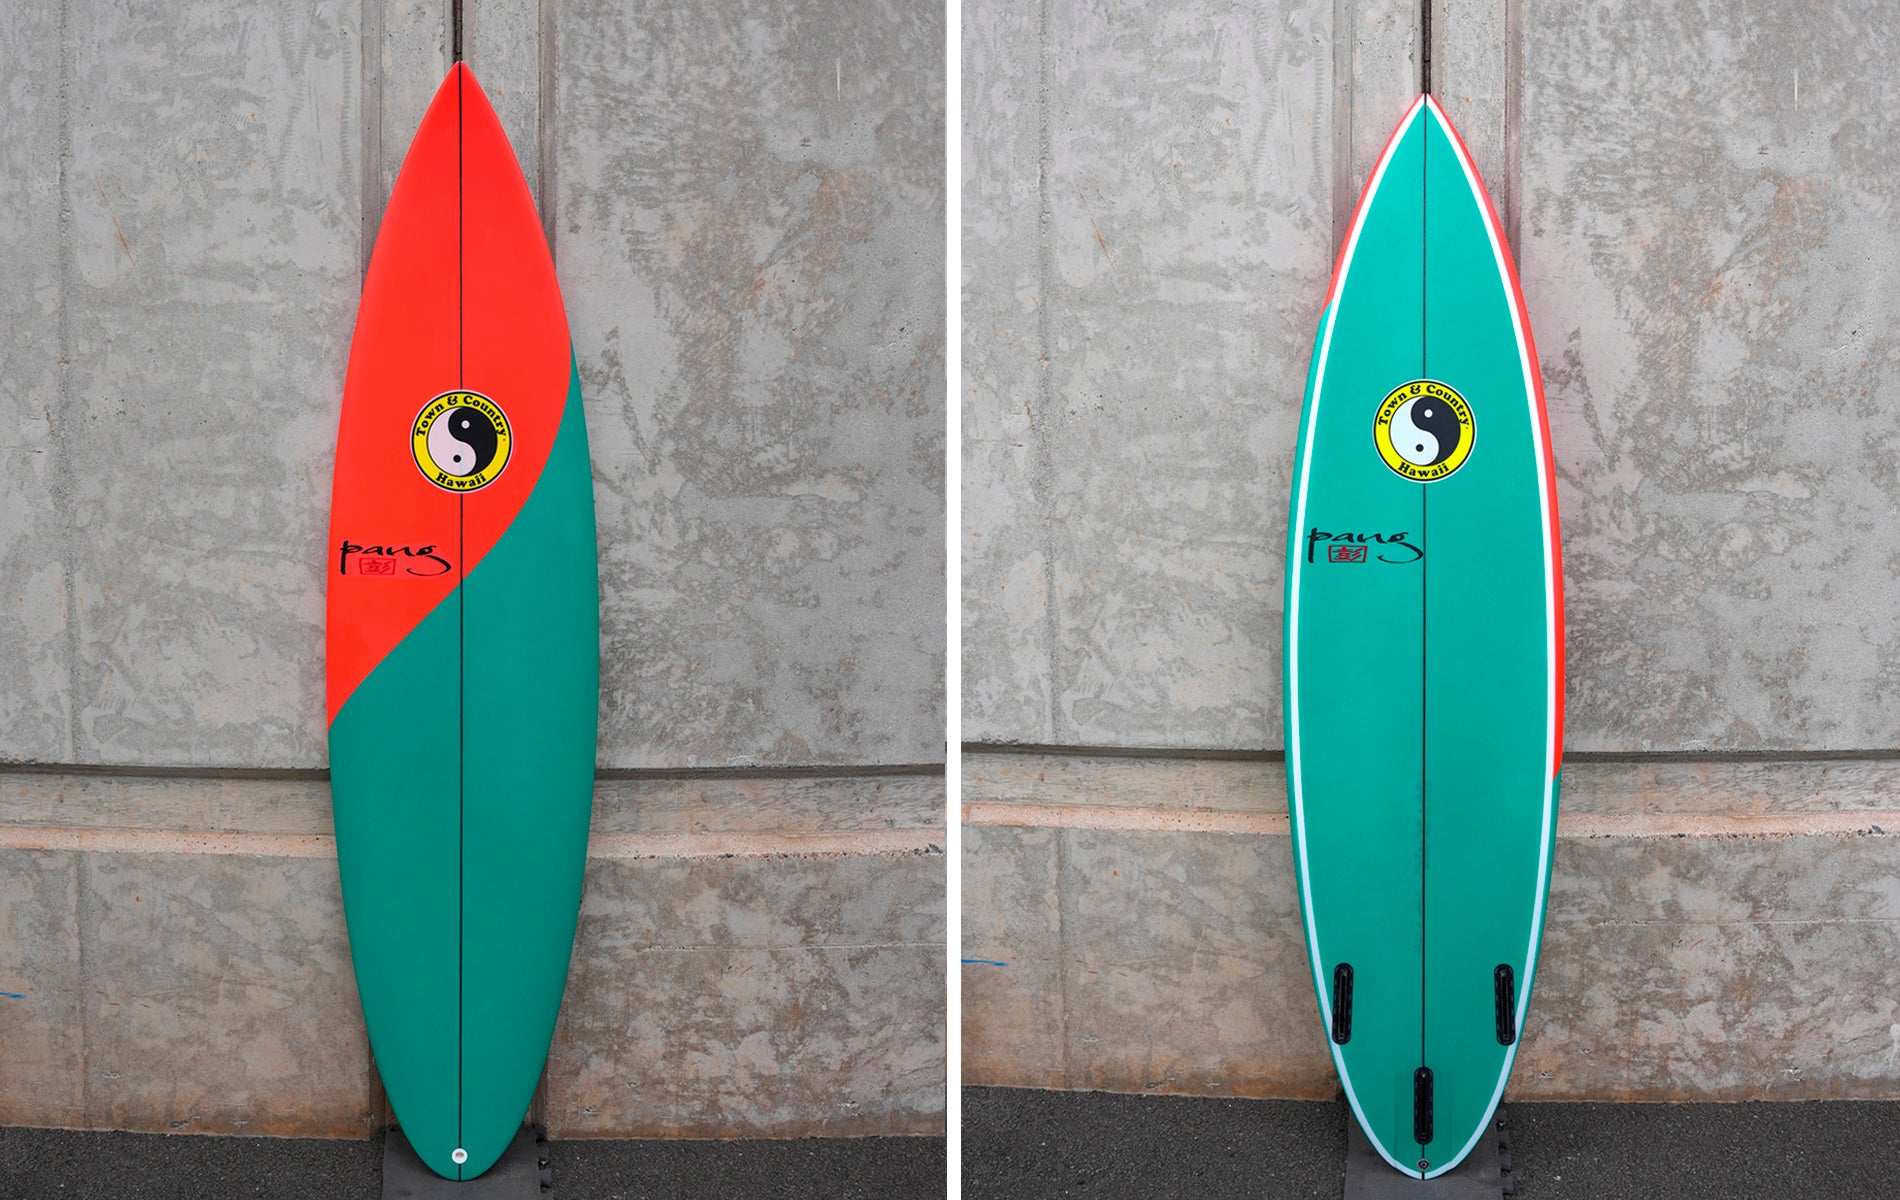 Watermelon colored 6'3" S-4VF shaped by Glenn Pang for team rider Brisa Hennessy.